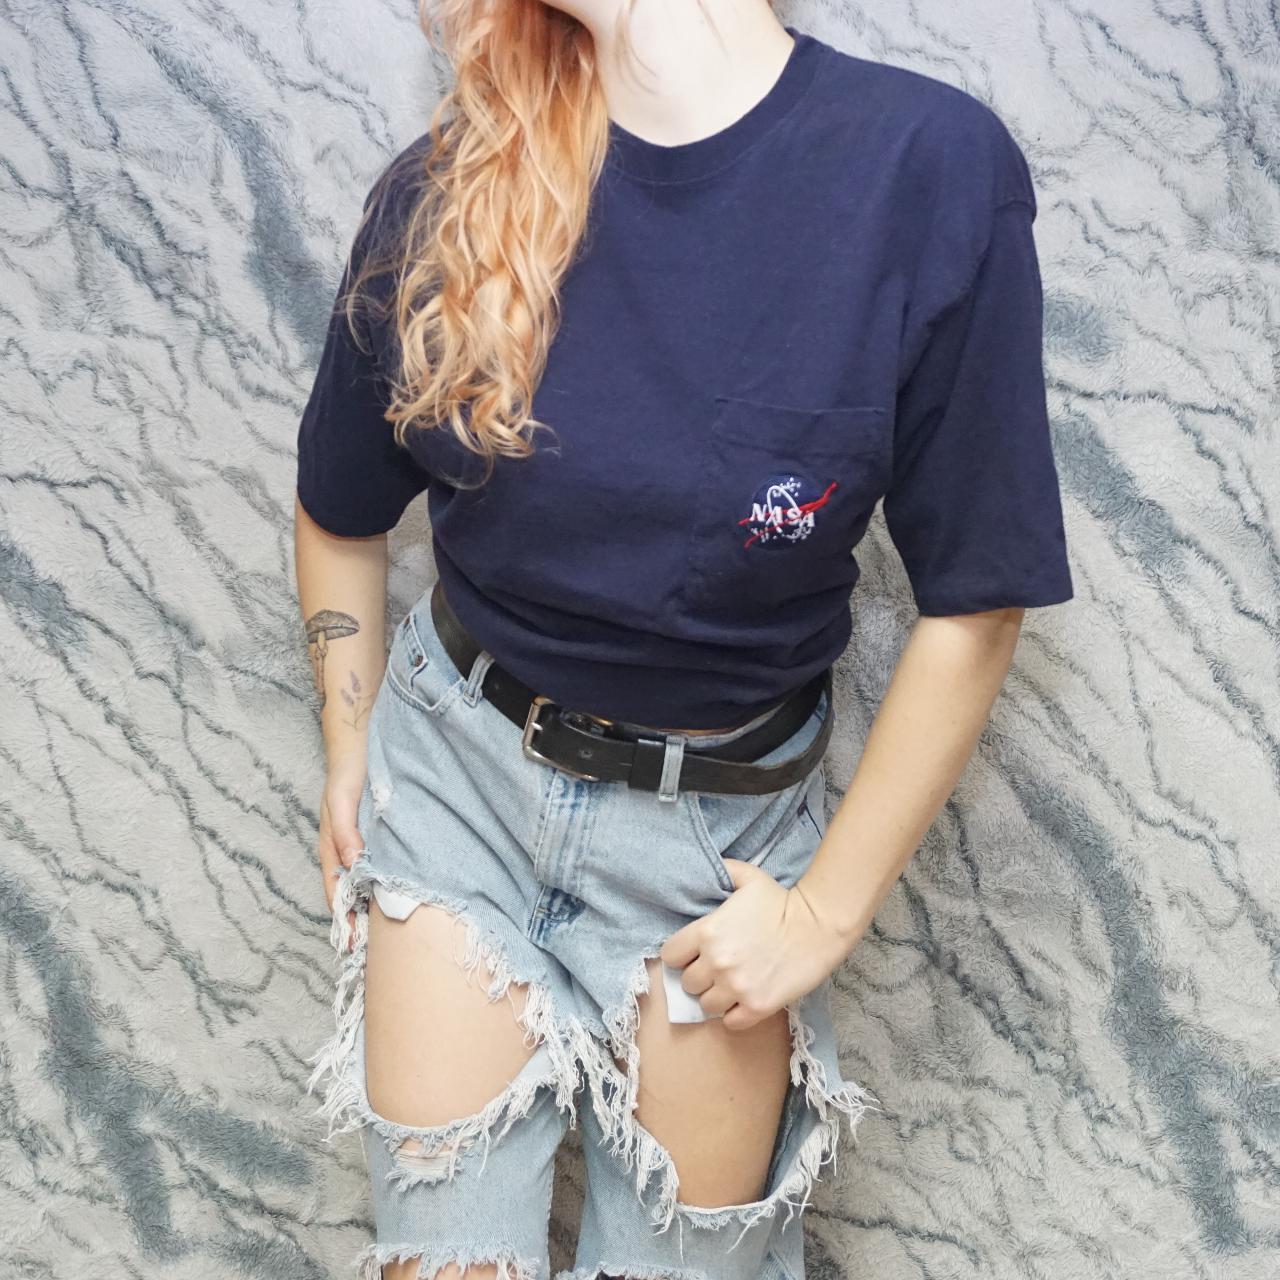 Product Image 2 - Embroidered NASA T
Size XXL

#NASA #Space